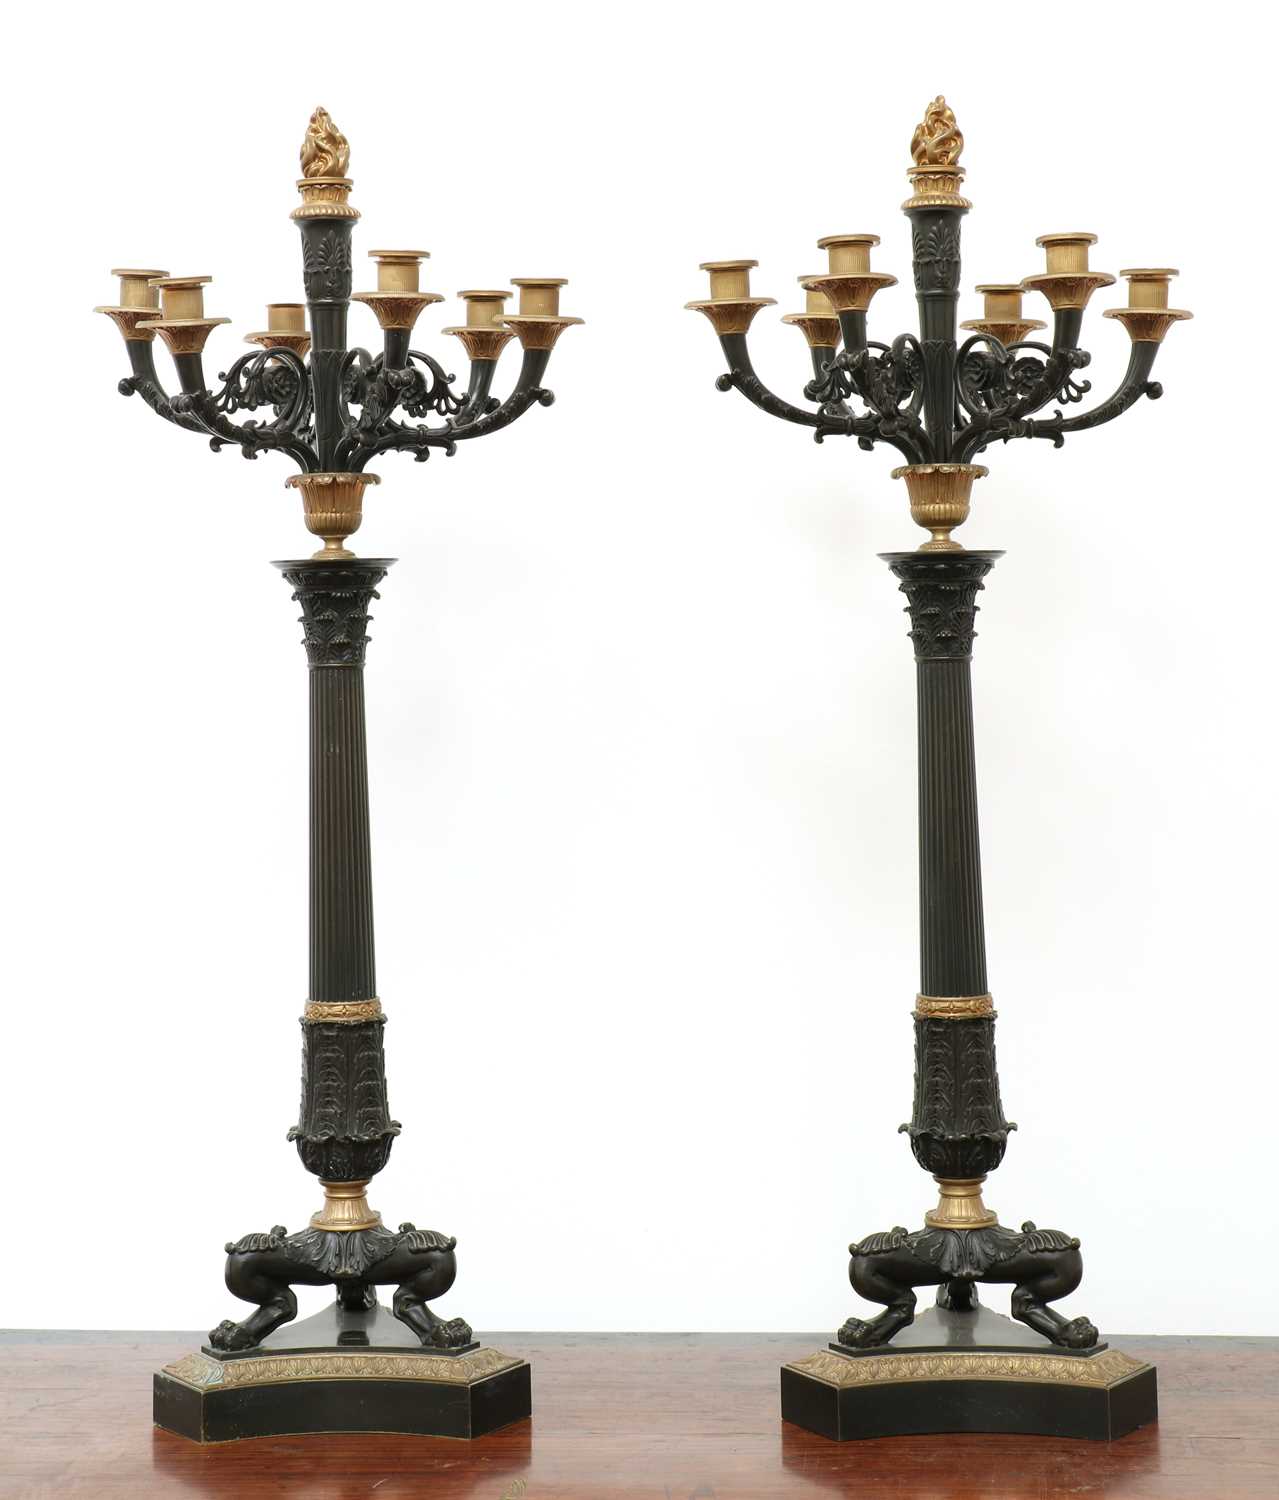 Lot 21 - A pair of large gilt and patinated bronze seven-light candelabra